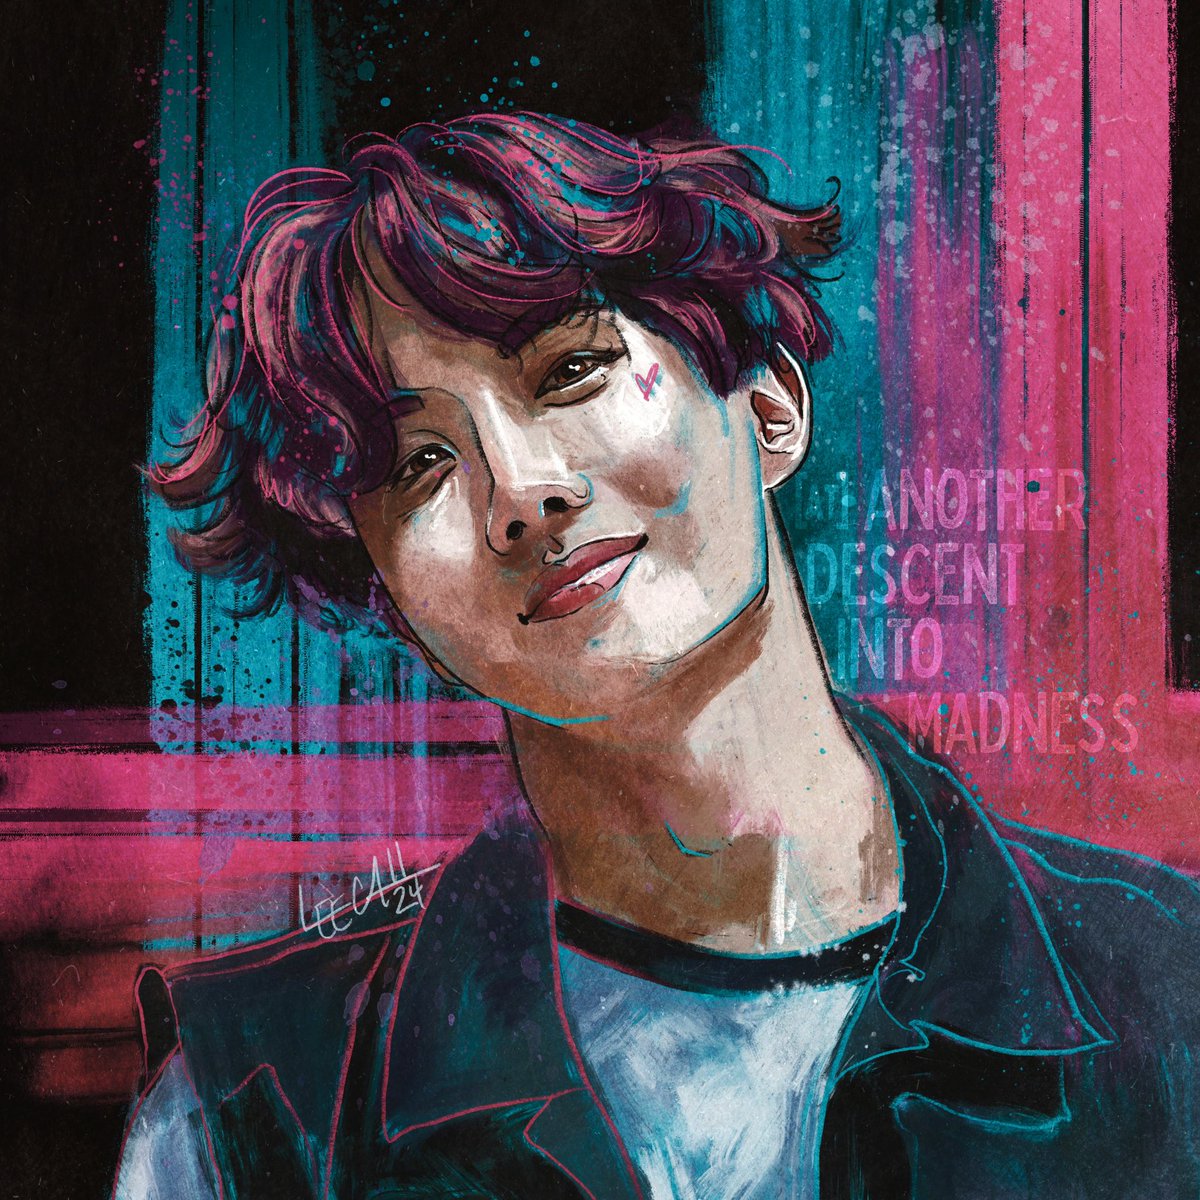 A little painting to celebrate Jung HoSeok, our hope 💖😊 for his birthday. Happy 30th, Hobi!
#happybirthdayhobi #JHOPE #fanart